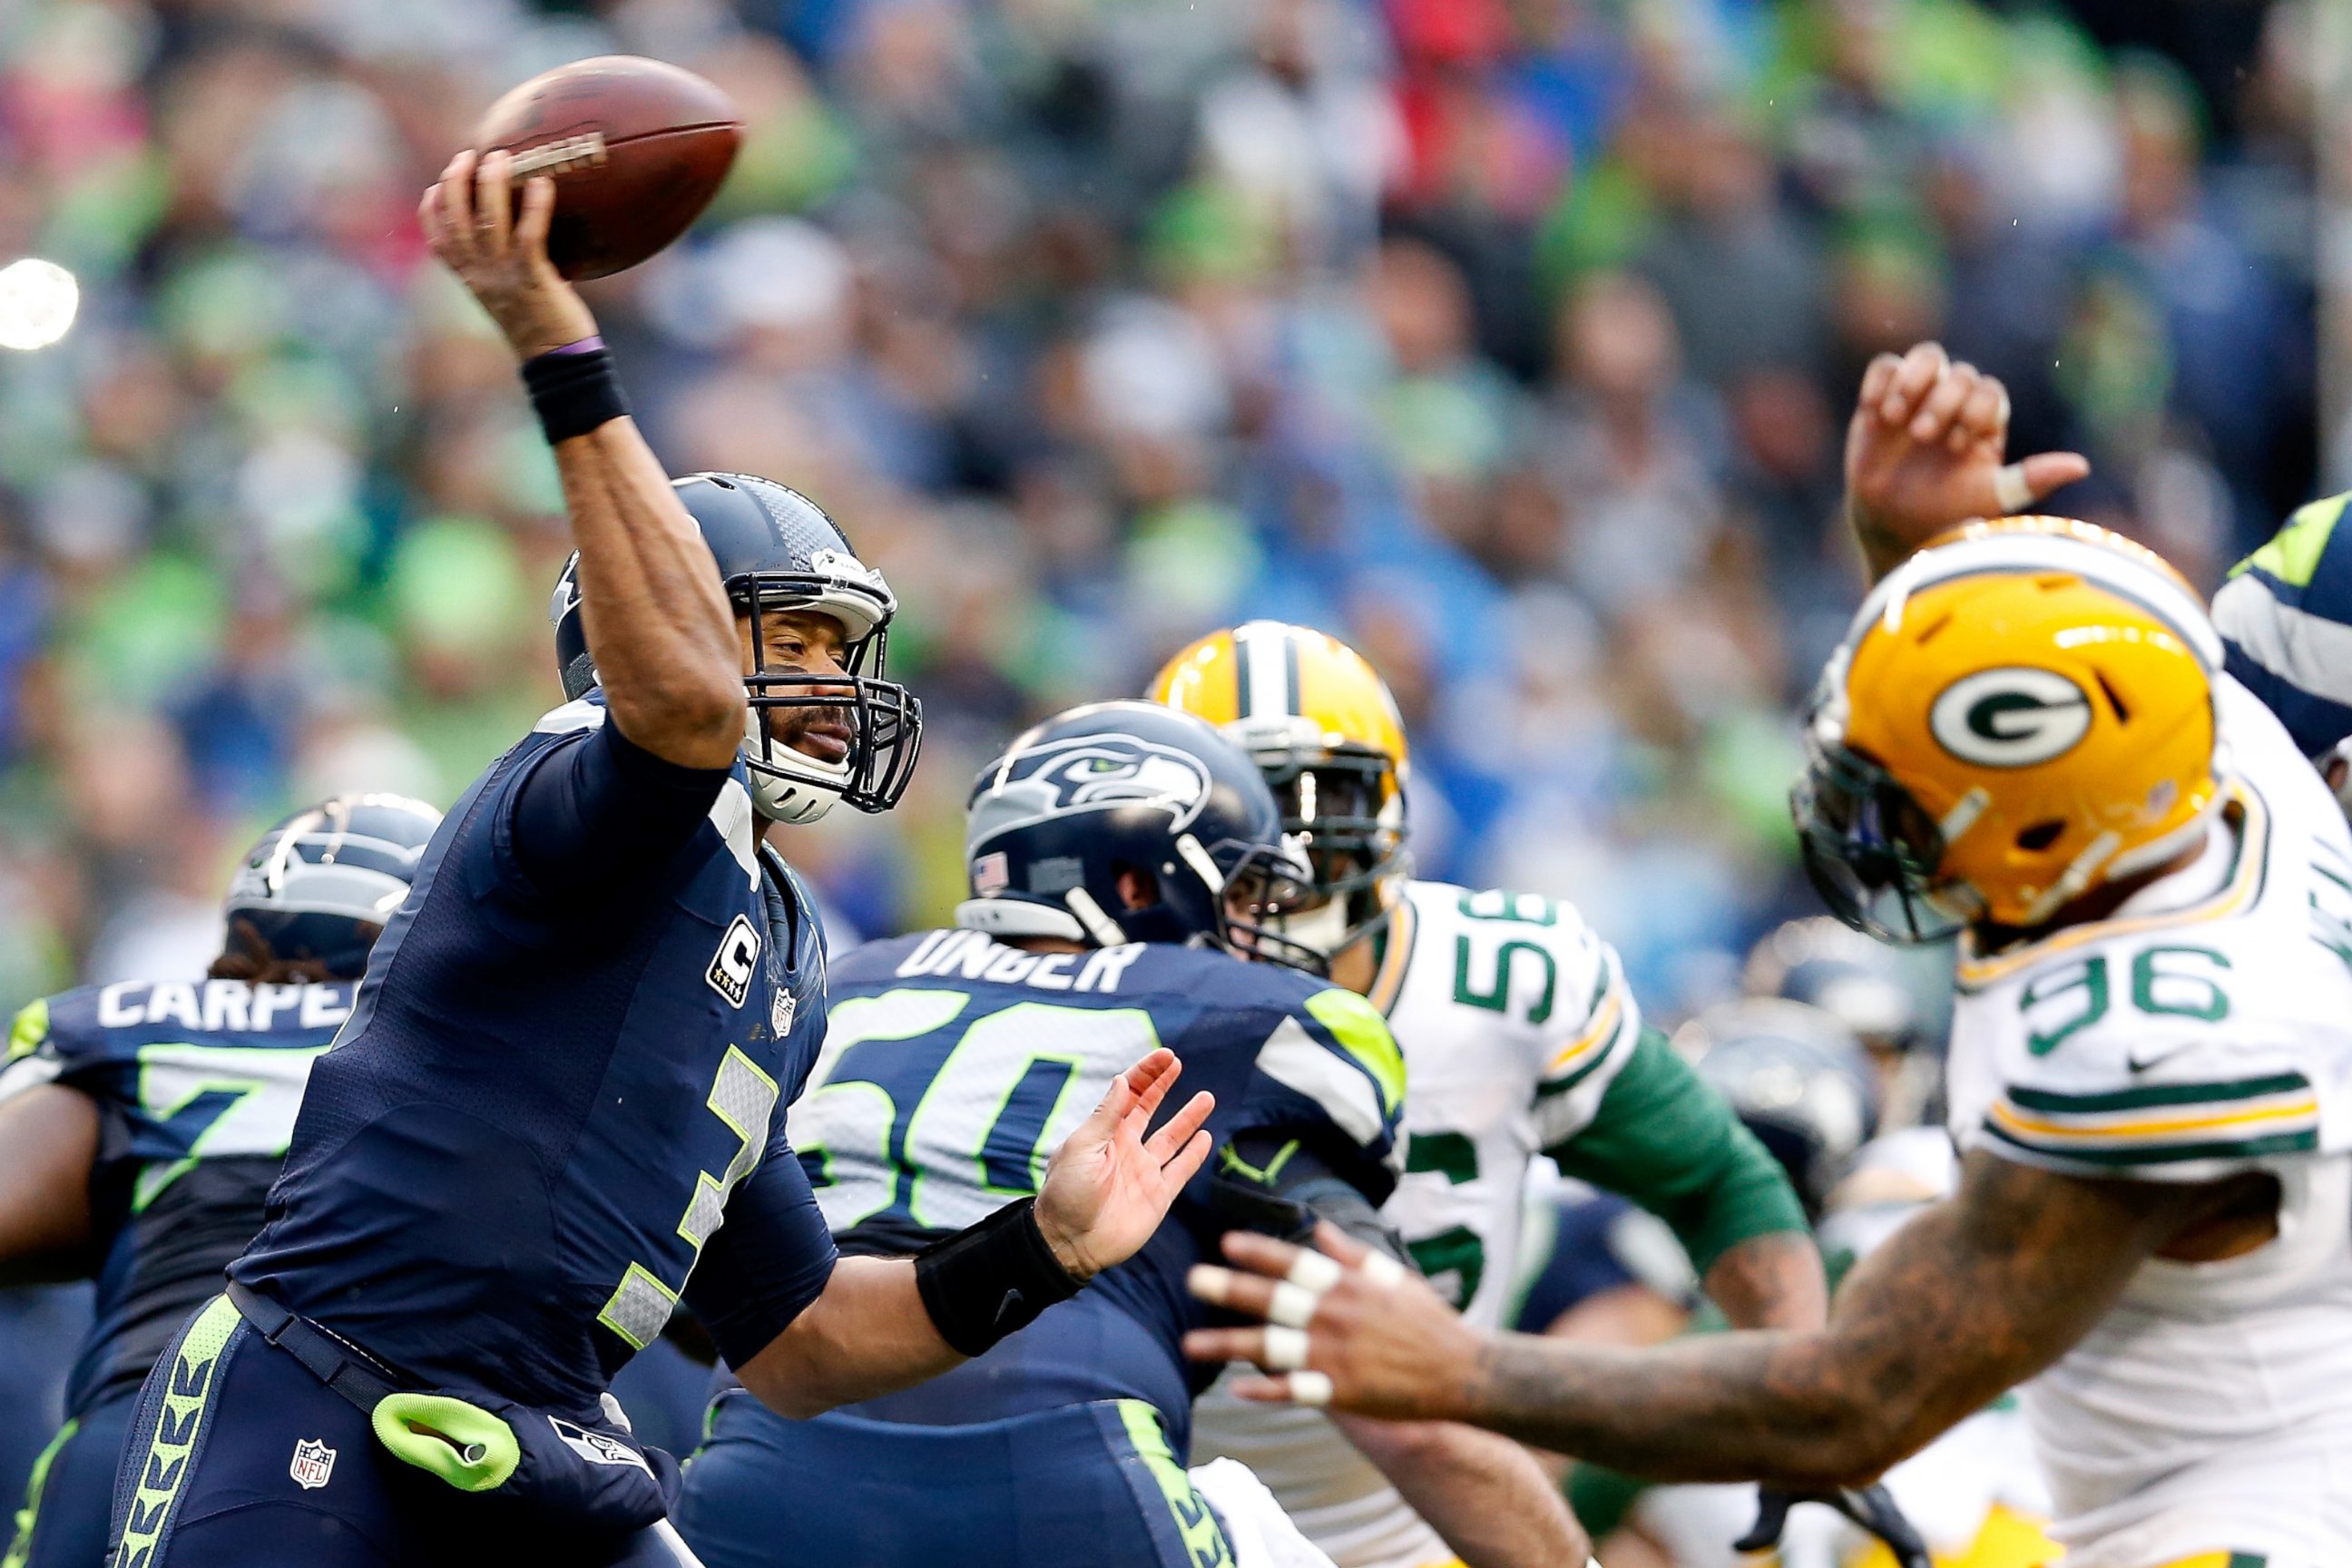 PHOTO: Russell Wilson #3 of the Seattle Seahawks passes the ball during second half of the 2015 NFC Championship game against the Green Bay Packers at CenturyLink Field, Jan. 18, 2015 in Seattle.